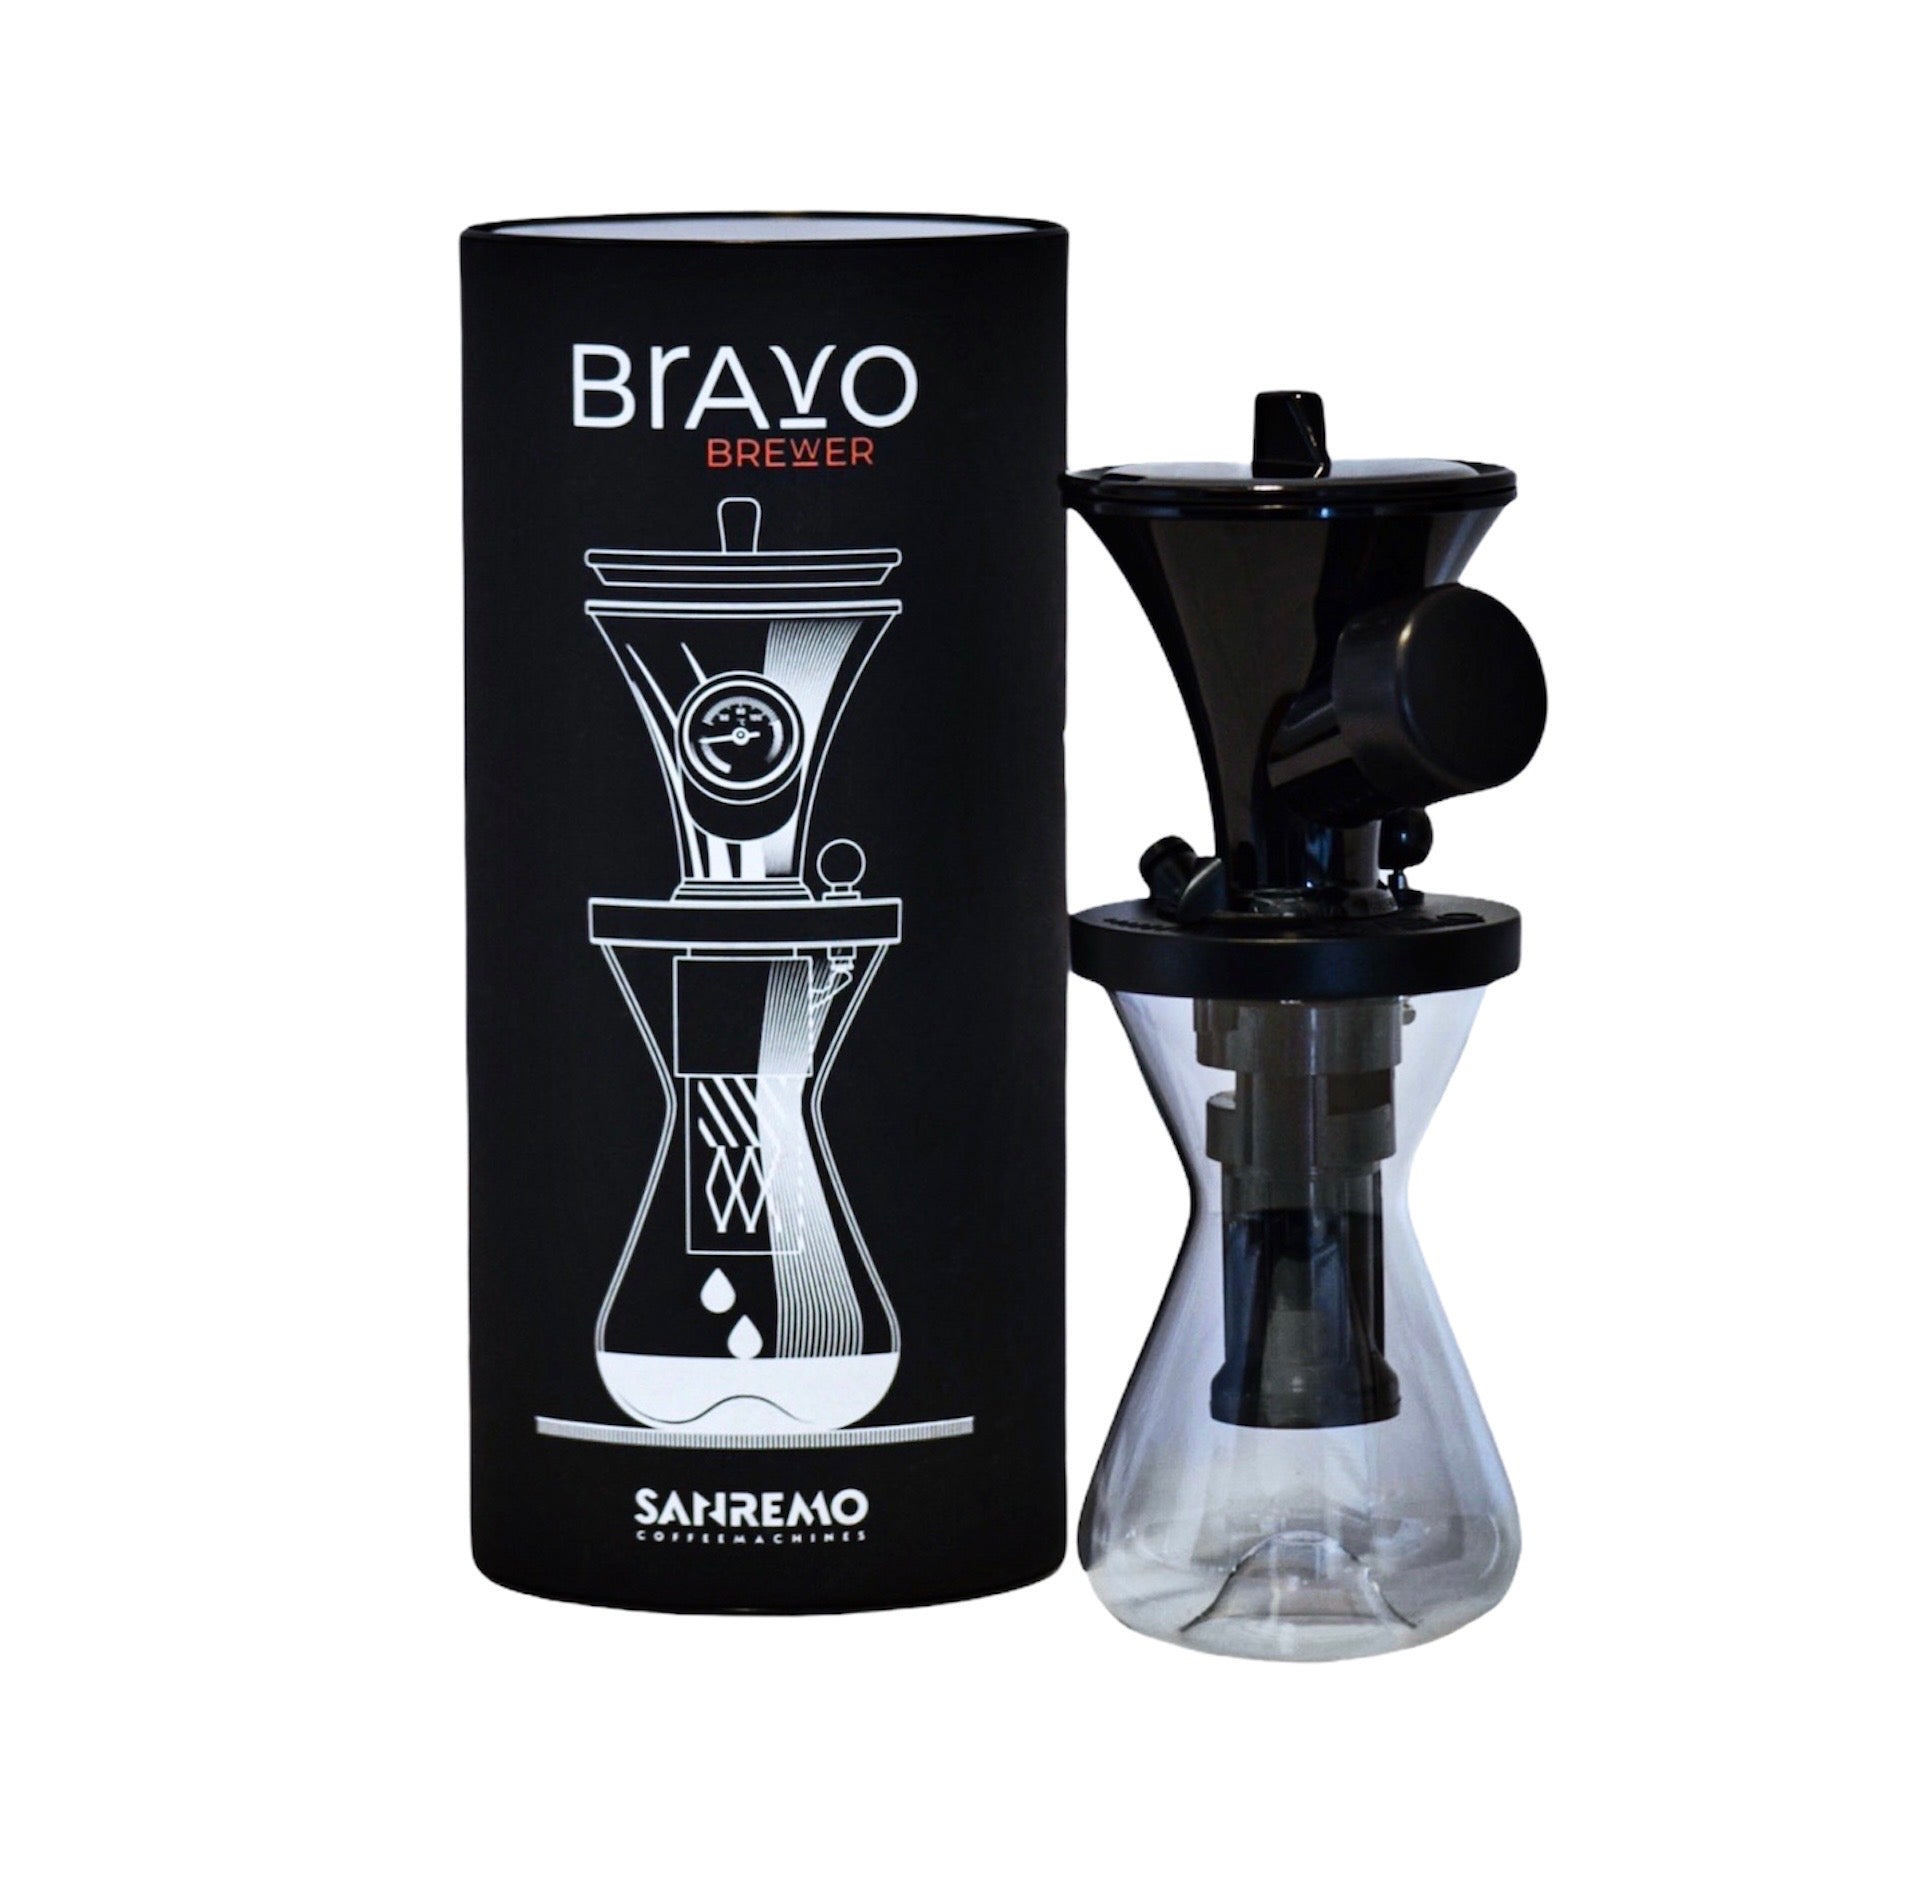 Bravo brewer by Sanremo best new brew method for the next brewer generation, made in Italy by professional baristas 